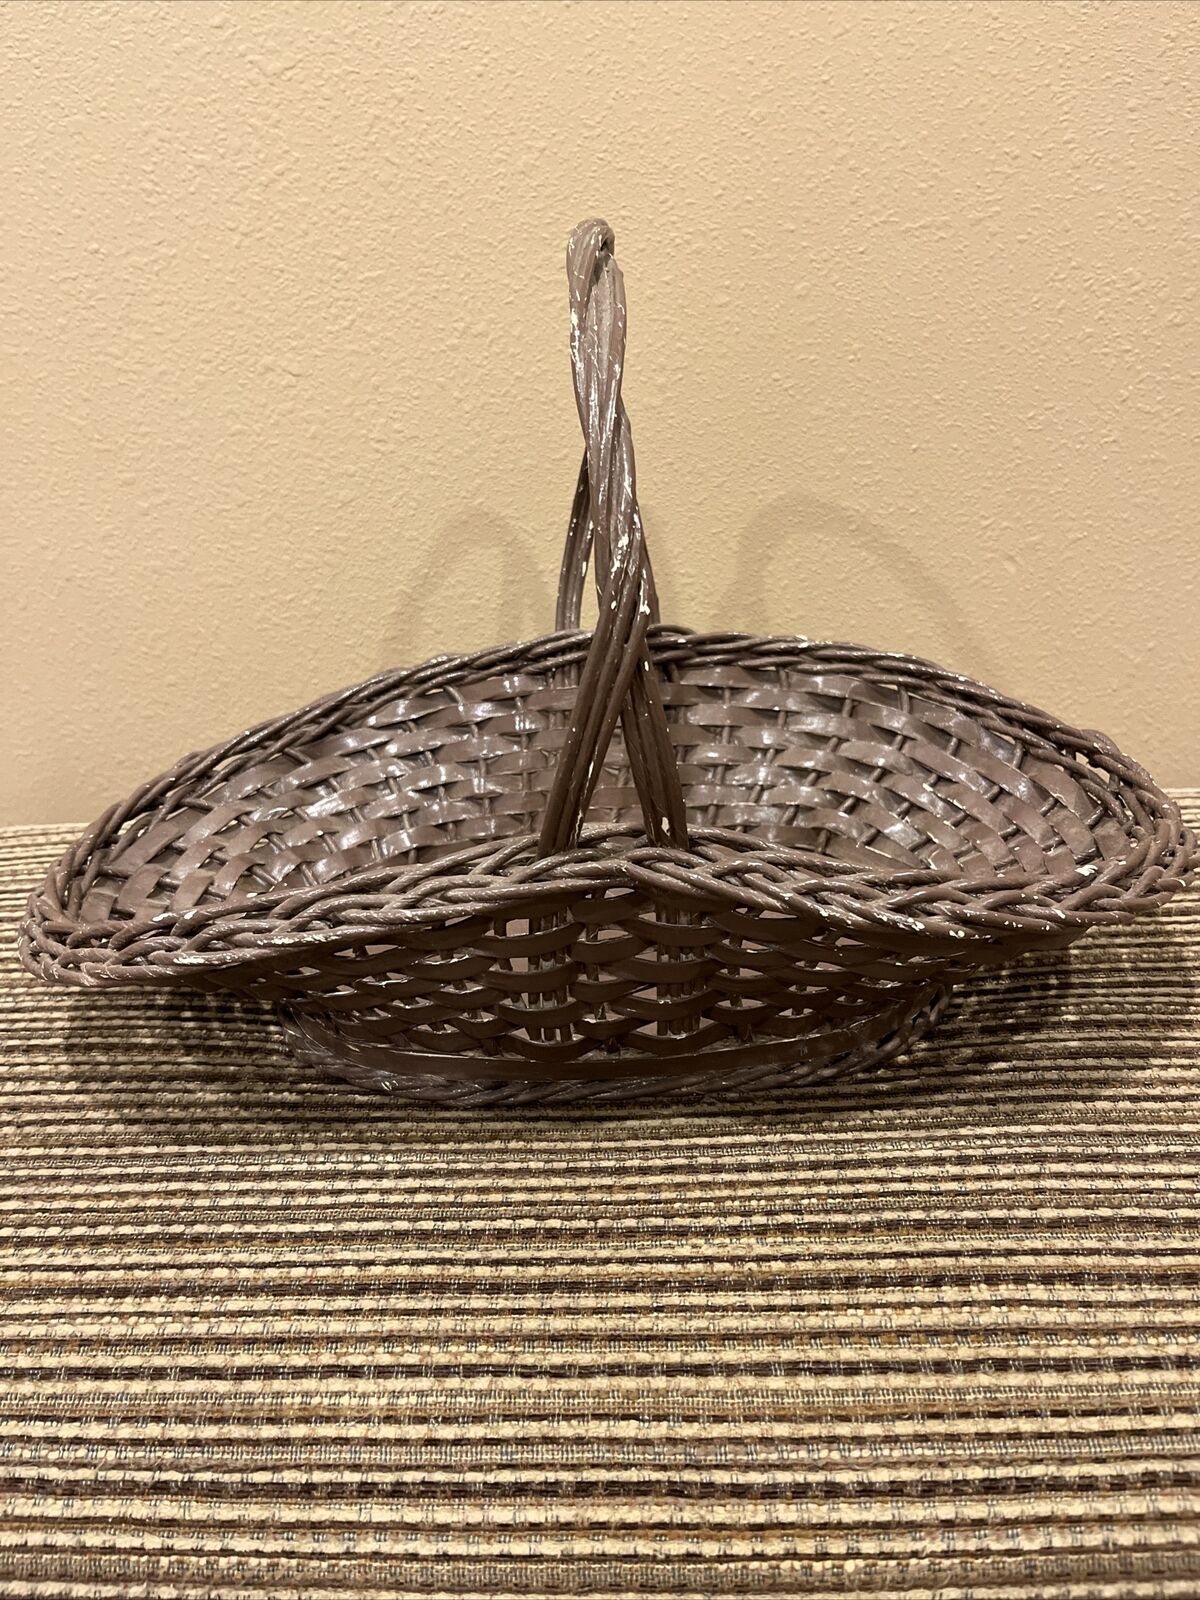 Vintage Hand Woven and Hand Packed Basket By Harry and David, Medford Oregon